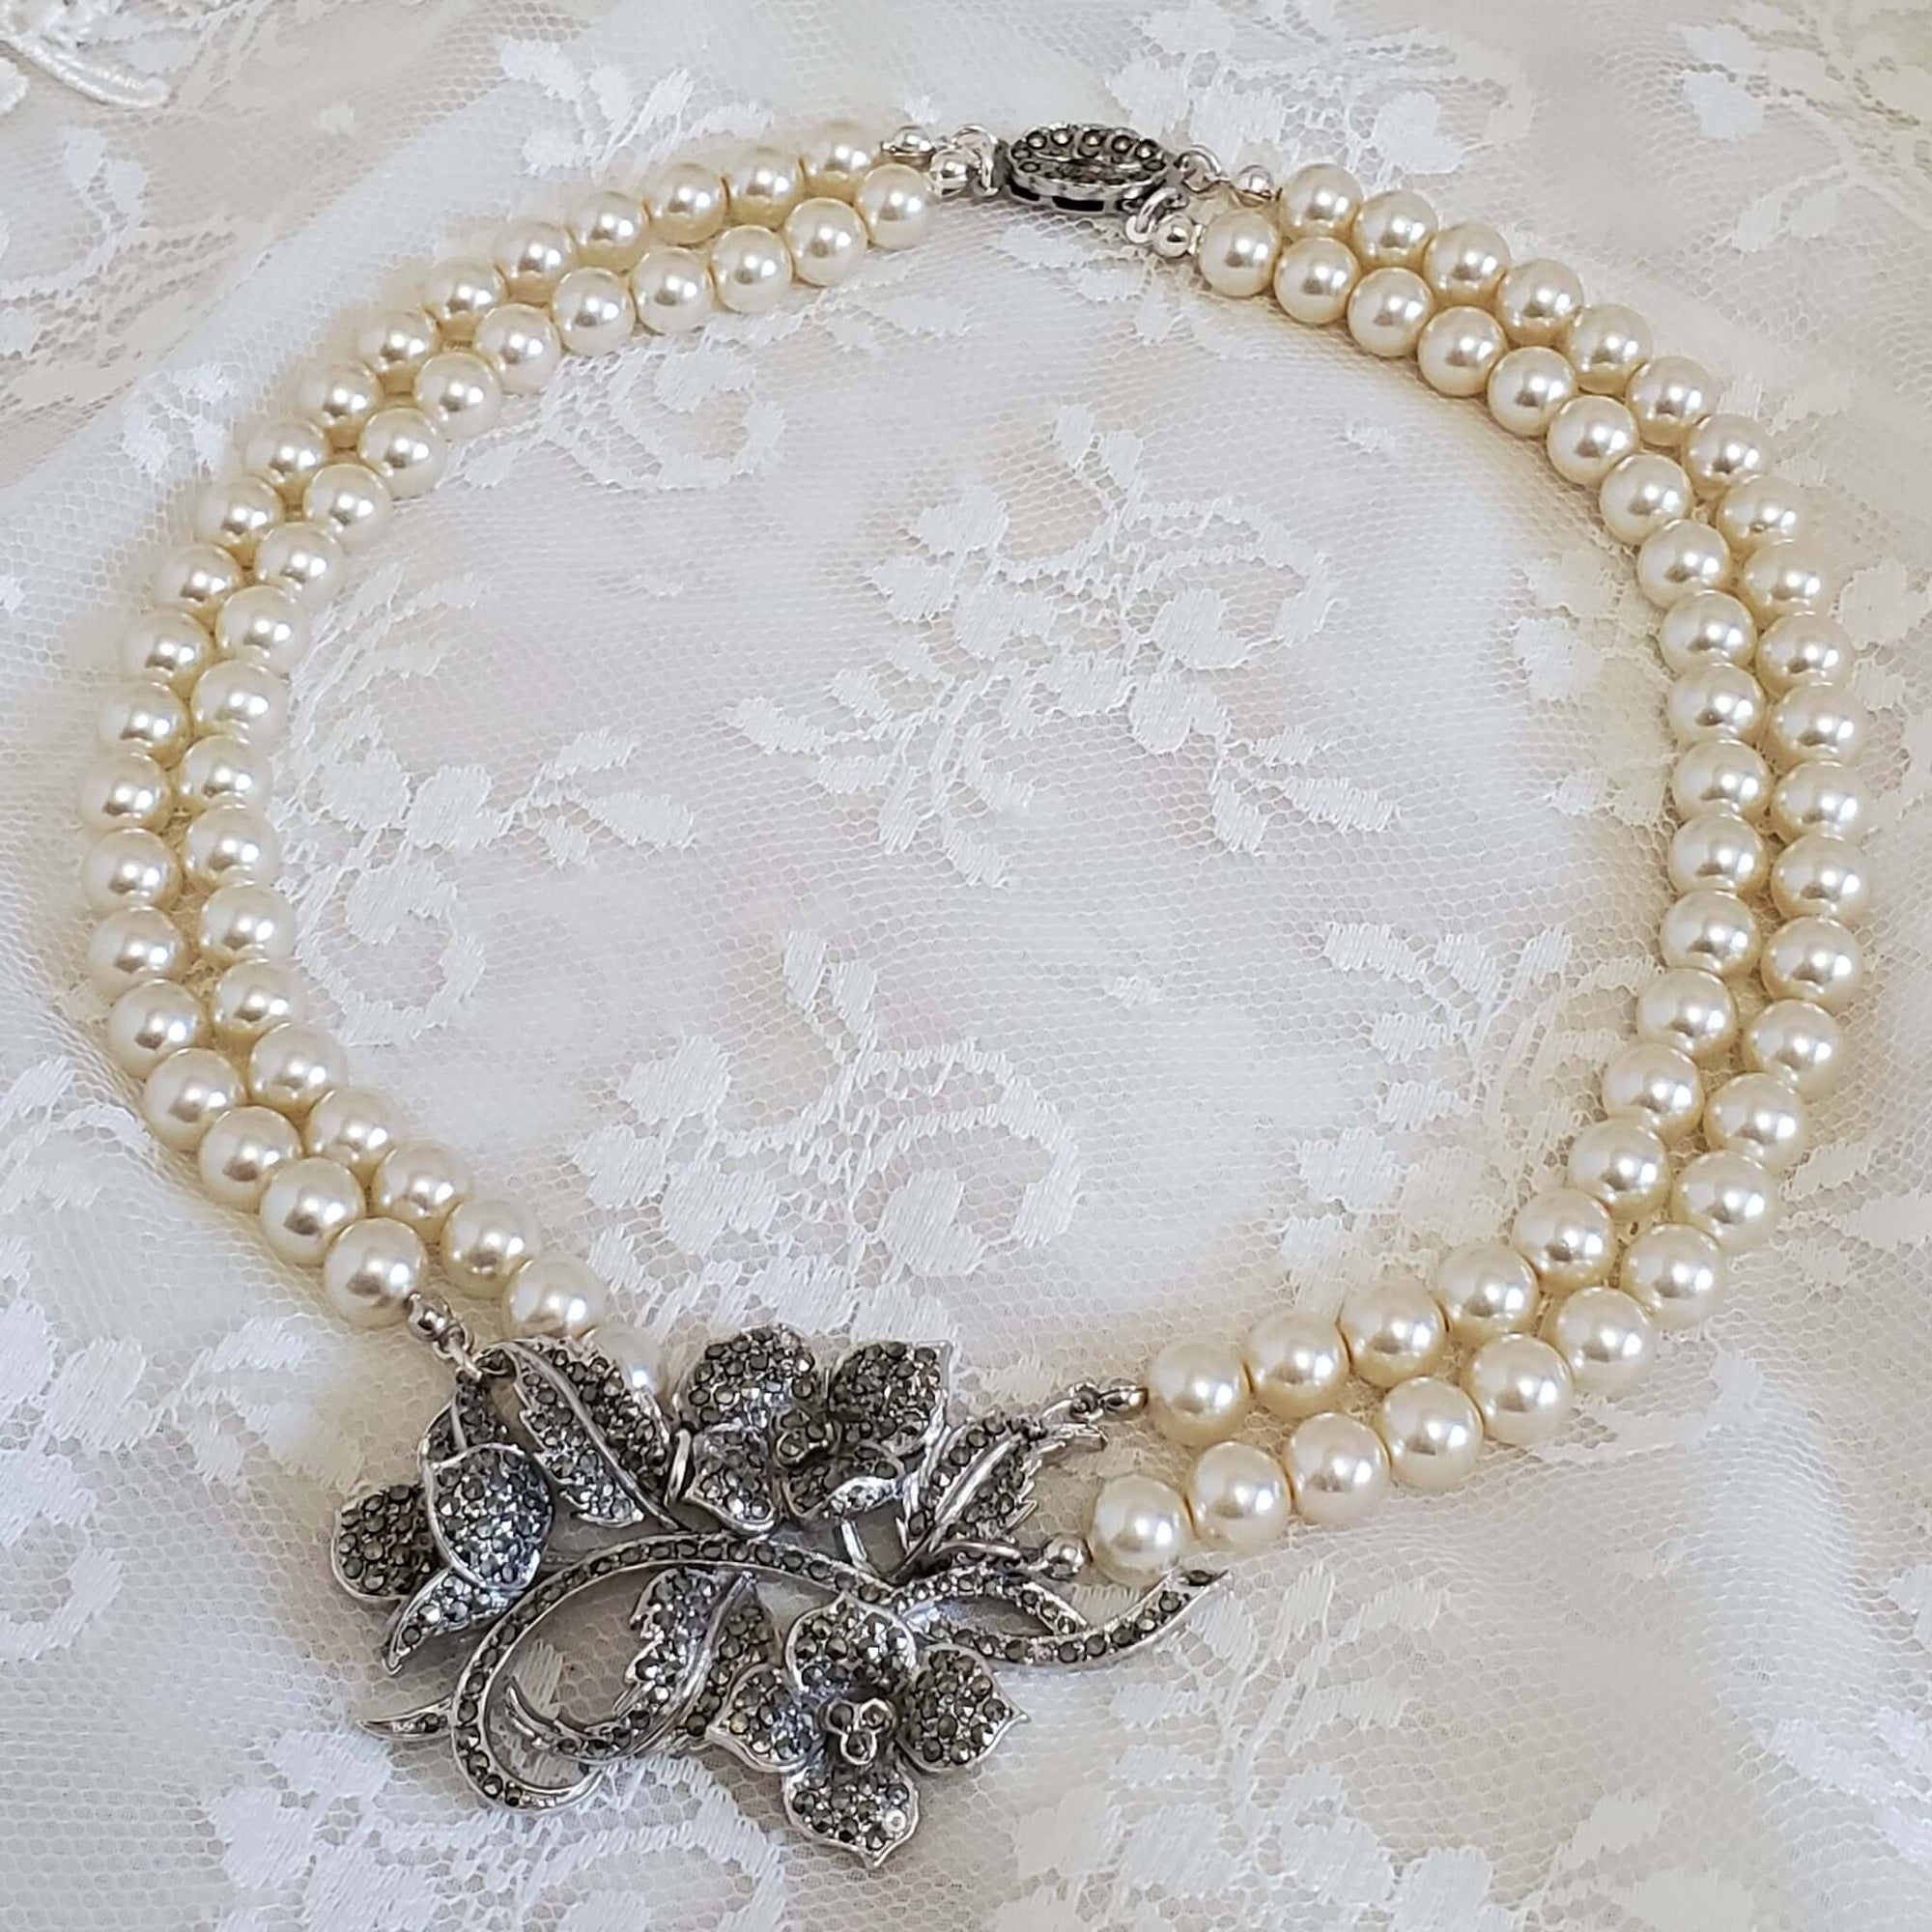 Vintage Two Strand Pearl Necklace in Light Buff Shade with Vintage Floral Pendant